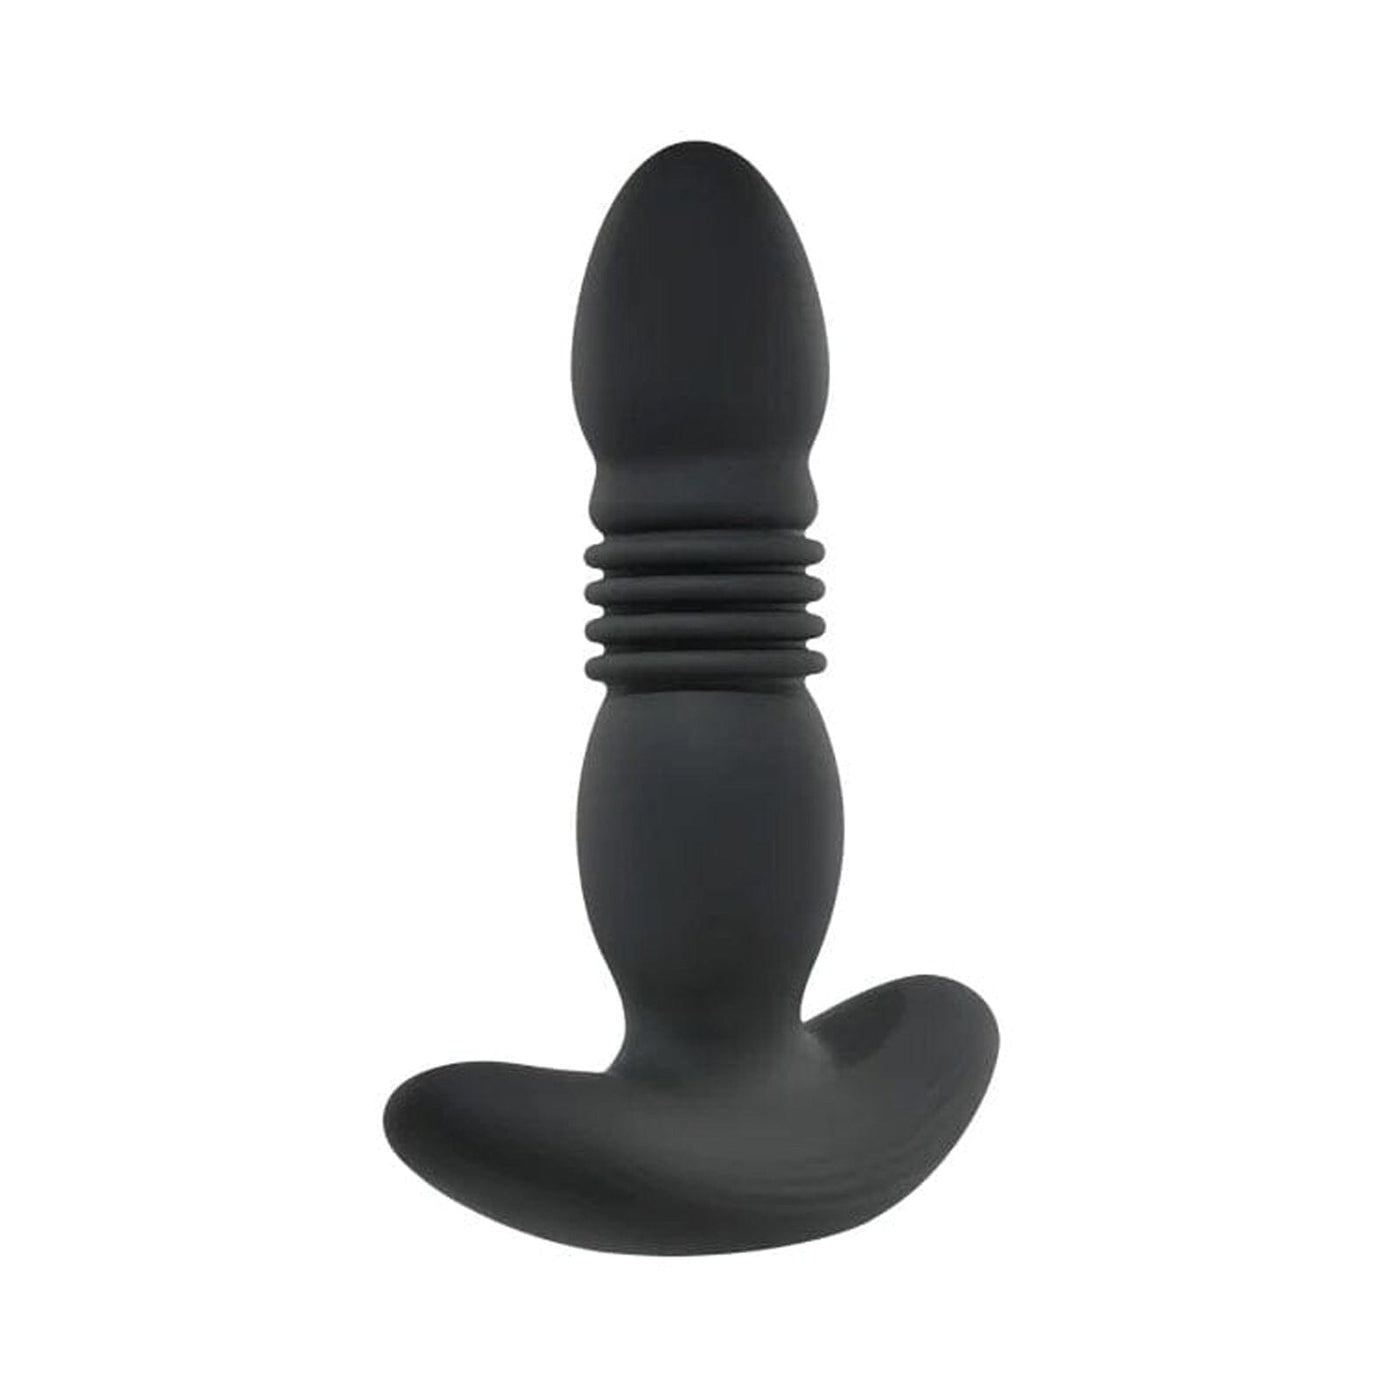 Trust the Thrust Rechargeable Butt Plug